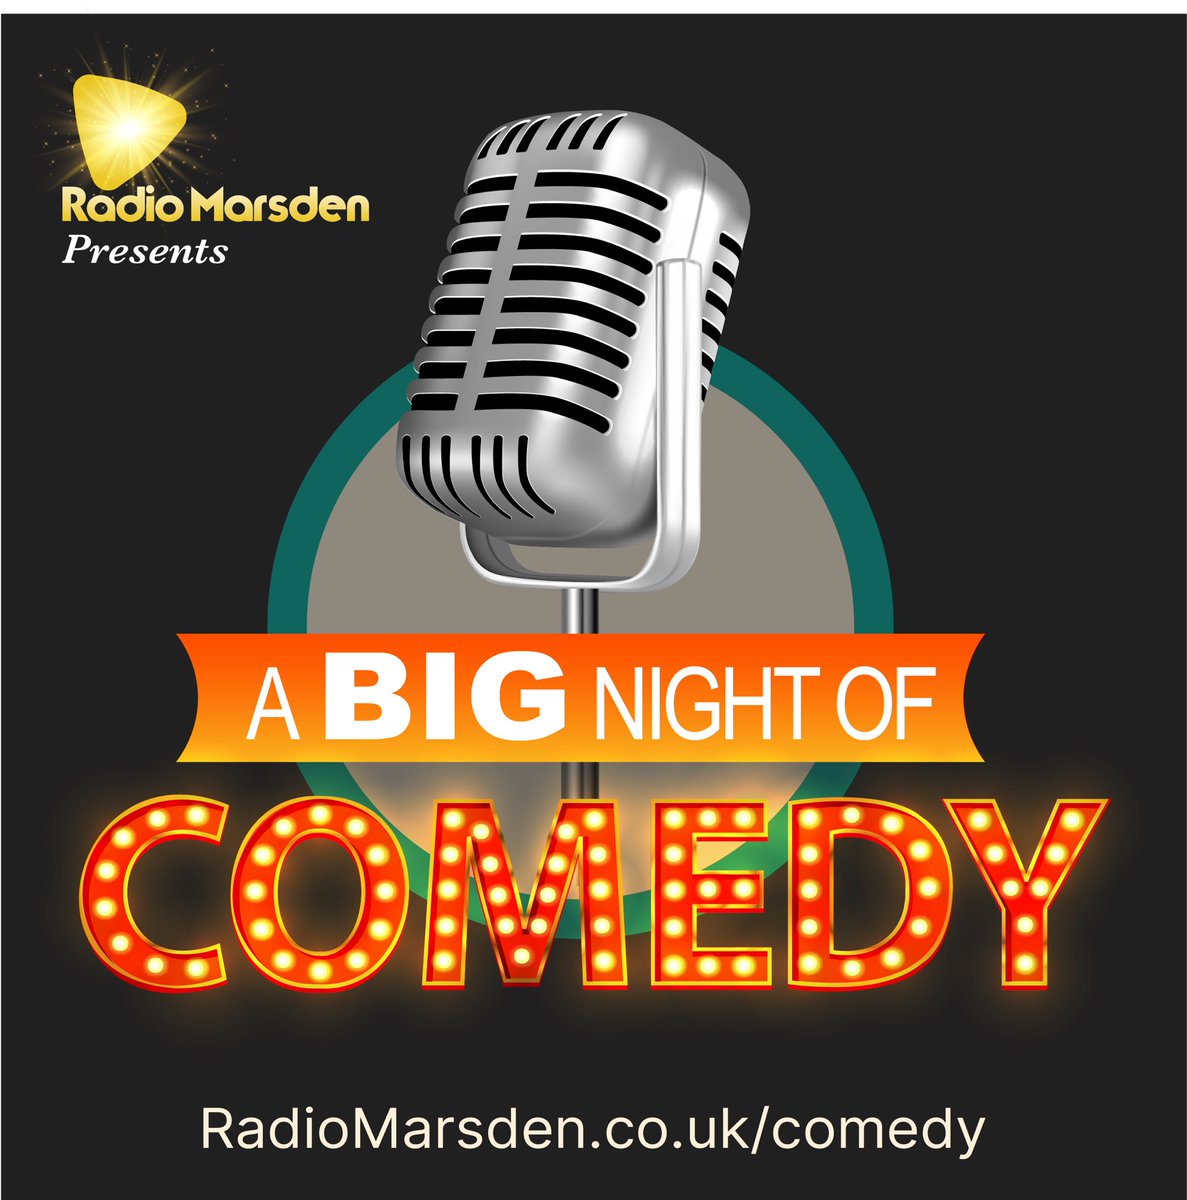 💥Tonight’s the night!💥 Give us a shout if you’re joining us tonight for ‘A BIG Night of Comedy’ 🤣 @DavidGoodings will be welcoming you in the foyer from 7pm with some top tunes. #comedy starts at 8pm. 1 stage, 1 mic, 1 million laughs - how about 1 million pounds?!!!!!! 💙